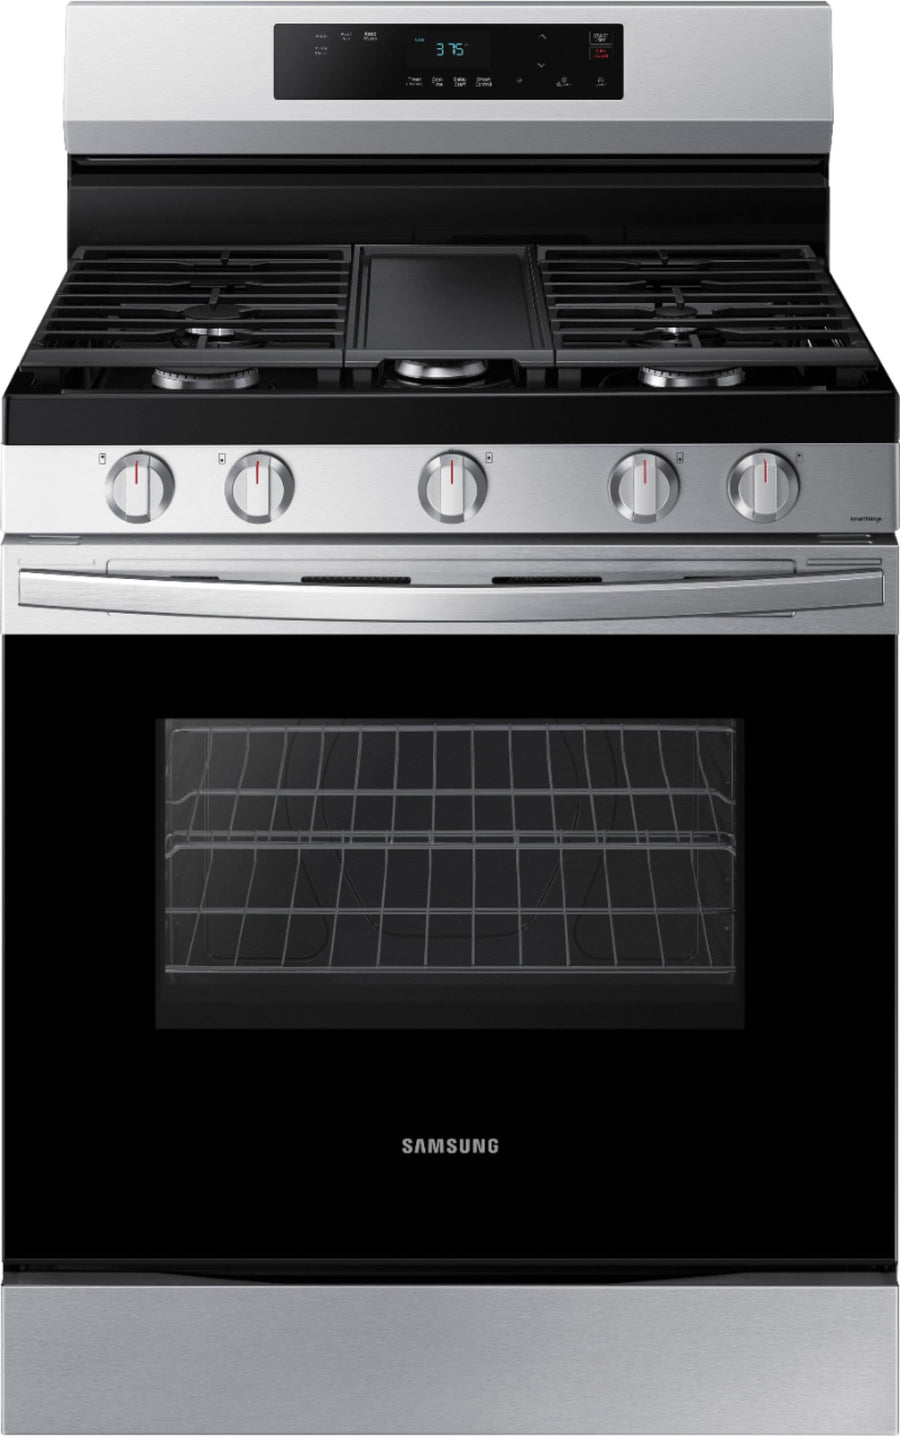 Samsung - 6.0 cu. ft. Freestanding Gas Range with WiFi and Integrated Griddle - Stainless steel_0